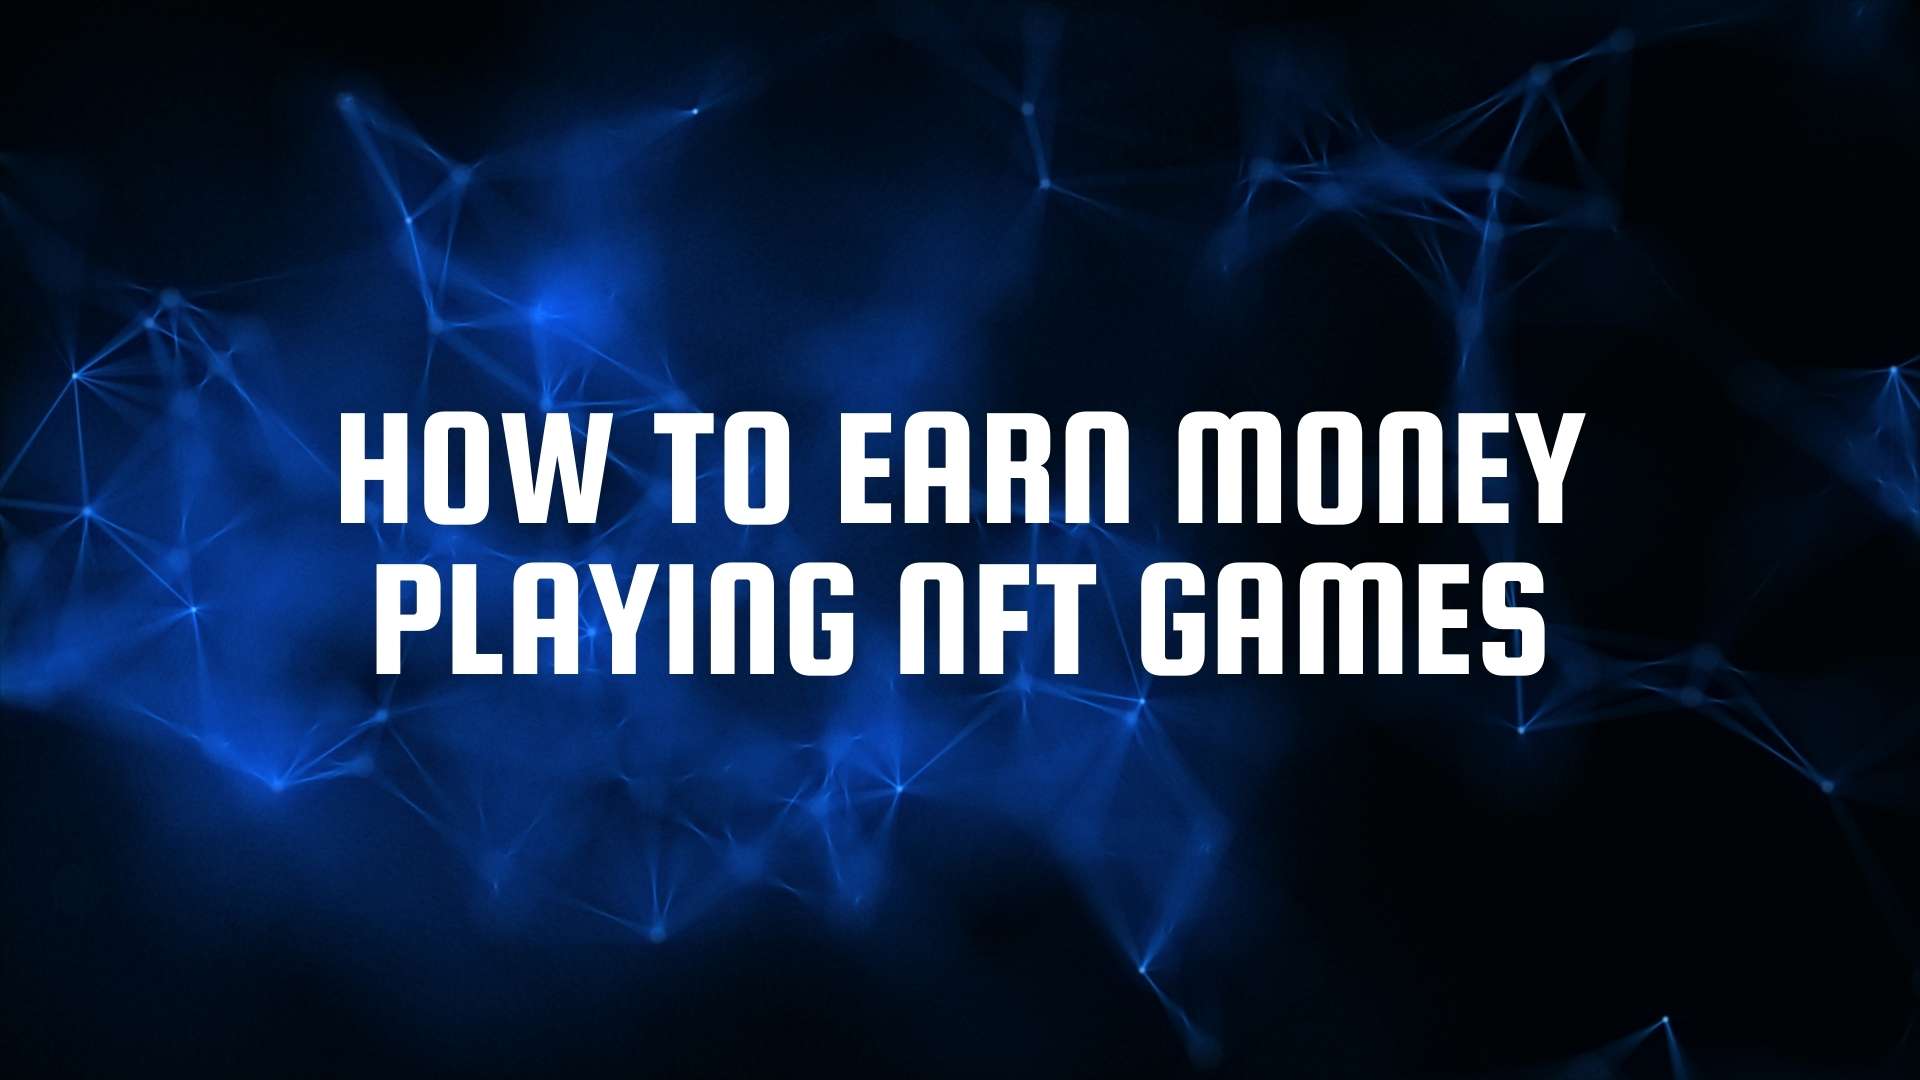 How to Earn Money Playing NFT Games